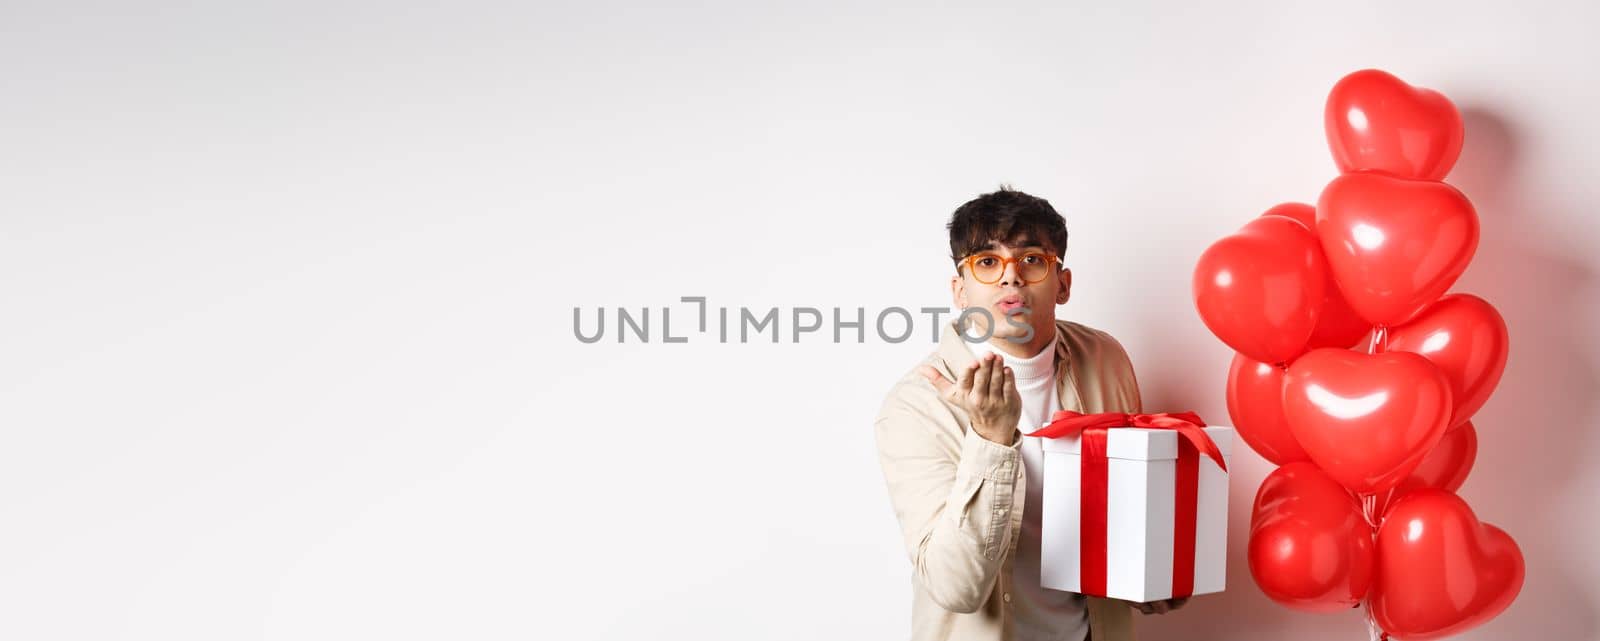 Valentines day and romance concept. Romantic modern man holding special gift for lover and sending air kiss at camera, standing near hearts balloons, white background.